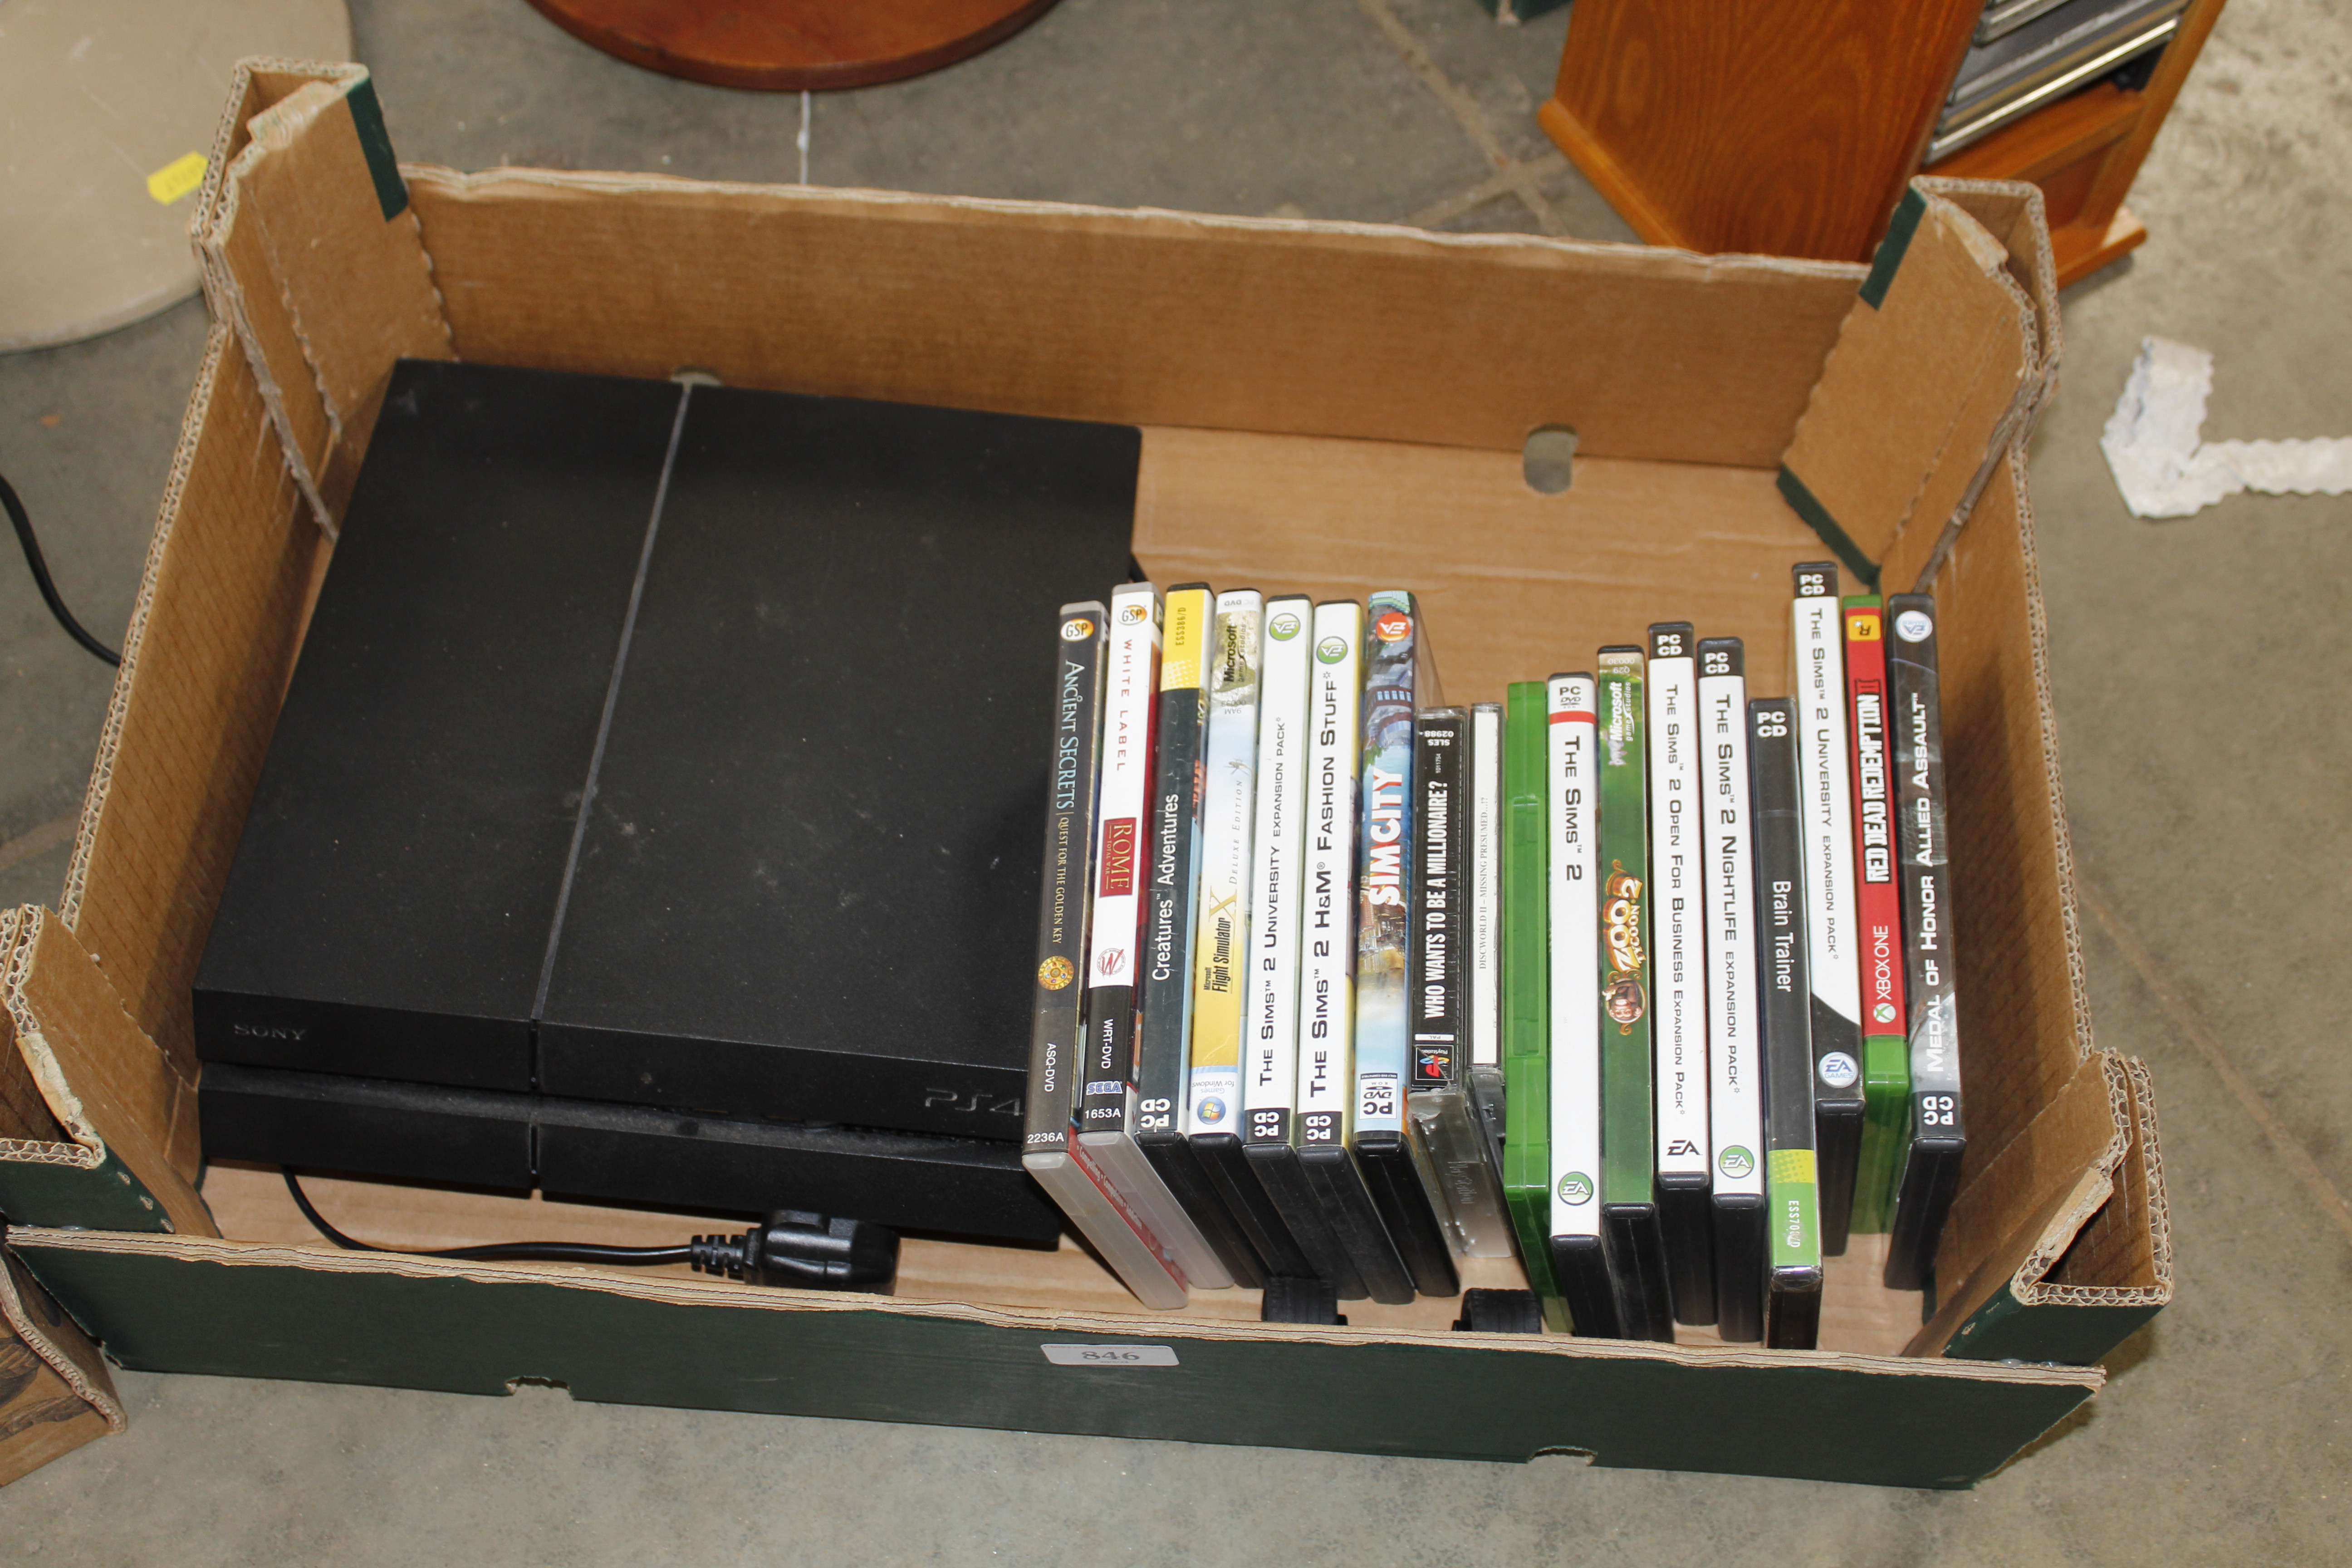 A Sony PlayStation IV and a collection of PC games